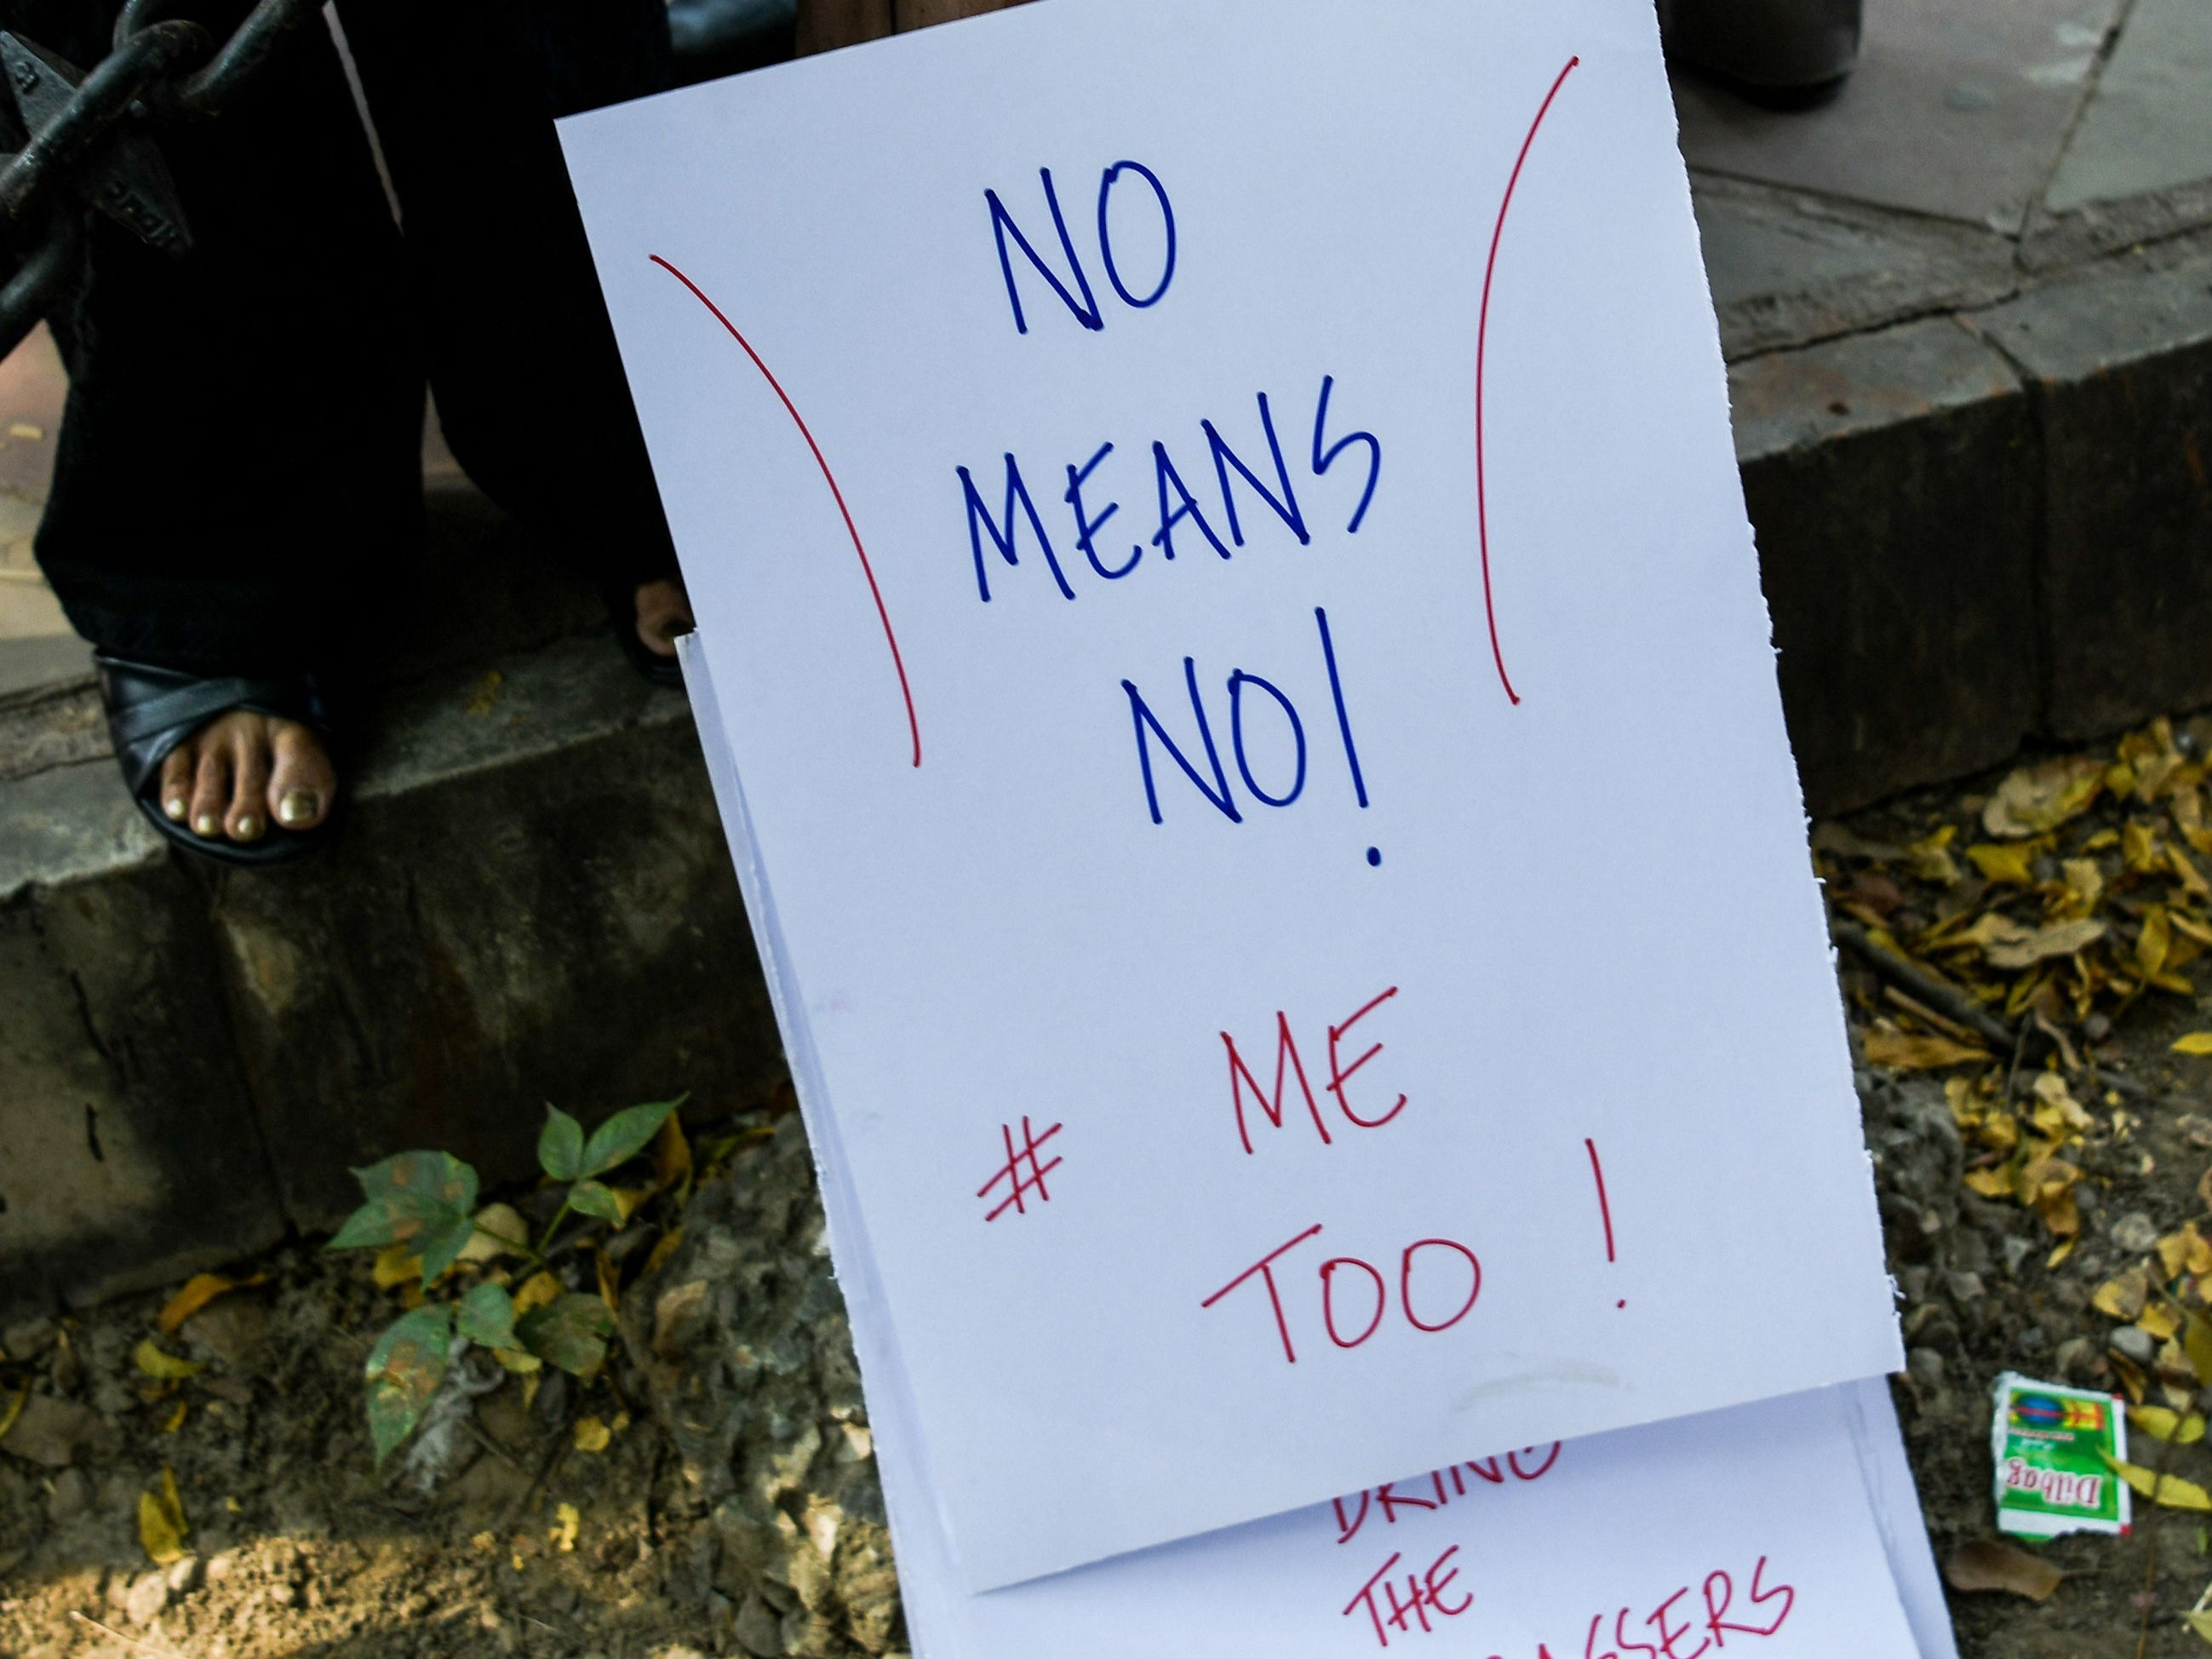 File: Protesters holds a placard at a protest against sexual harassment in New Delhi on 13 October 2018